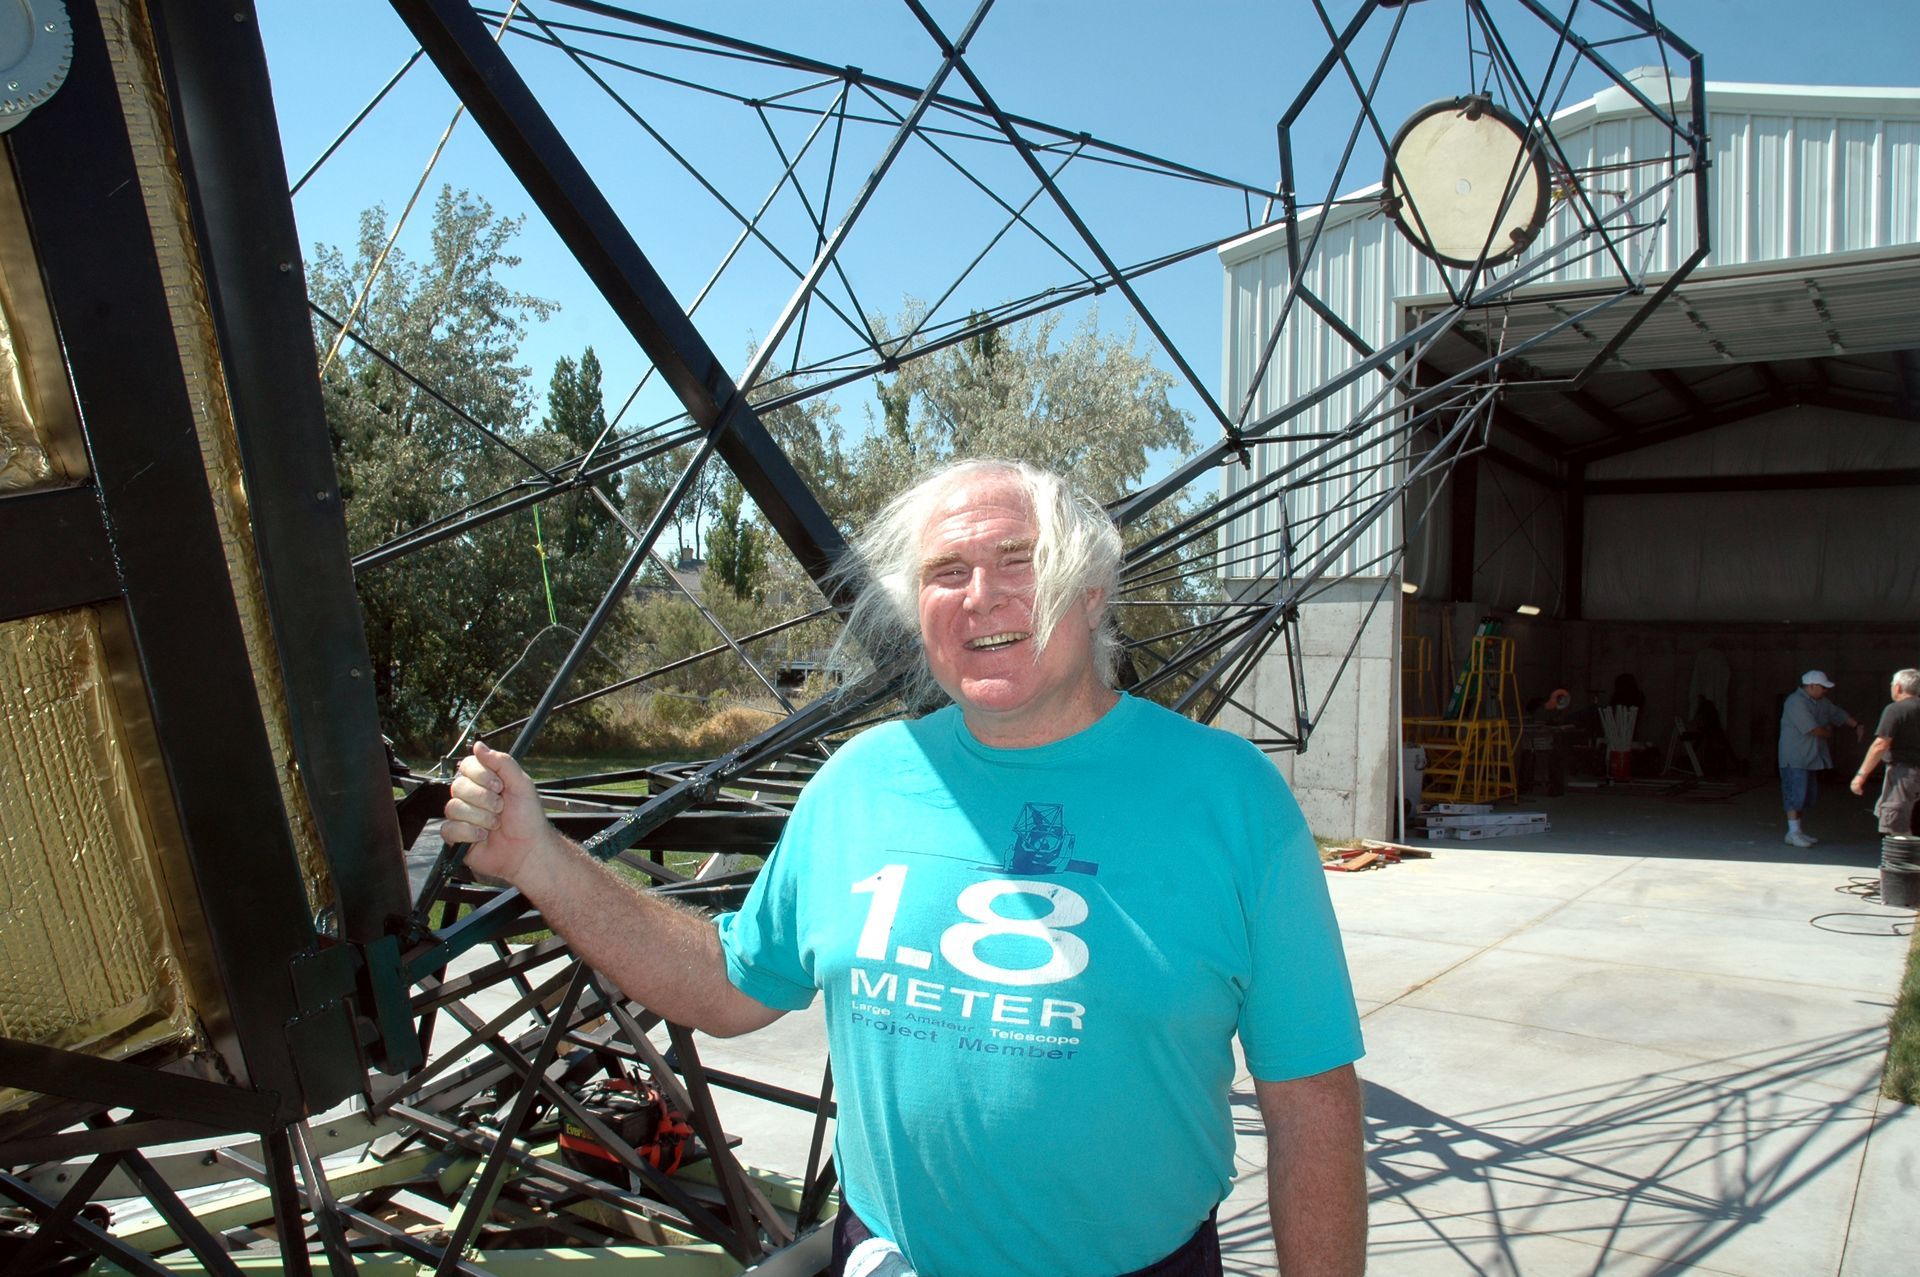 World's Largest Amateur Telescope, world record in Stansbury Park, Utah